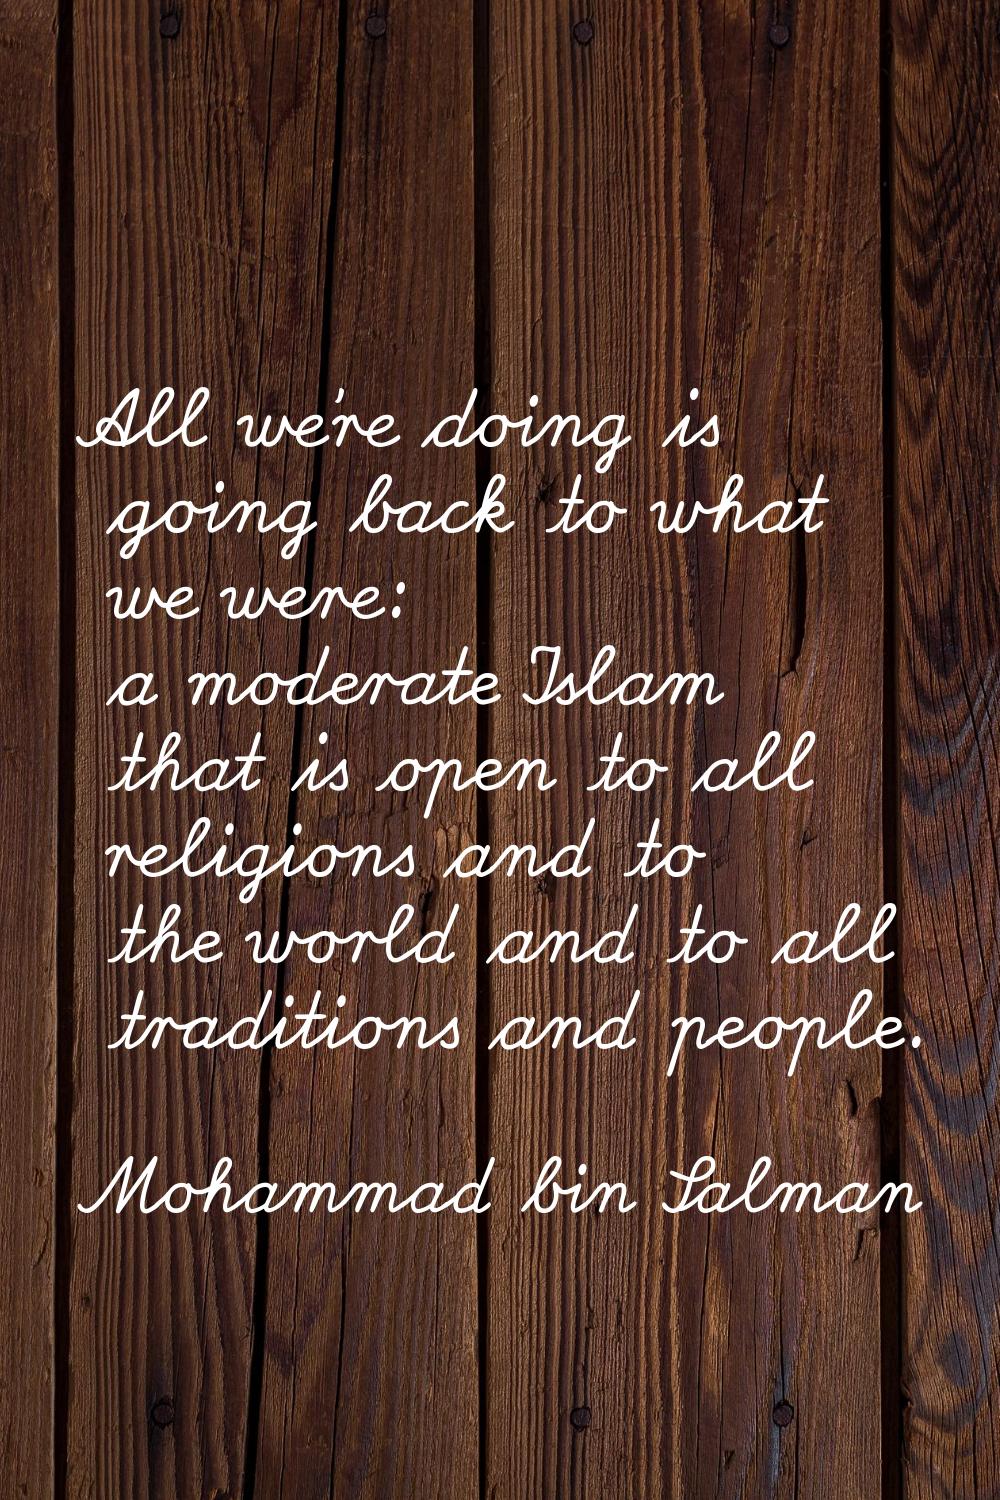 All we're doing is going back to what we were: a moderate Islam that is open to all religions and t